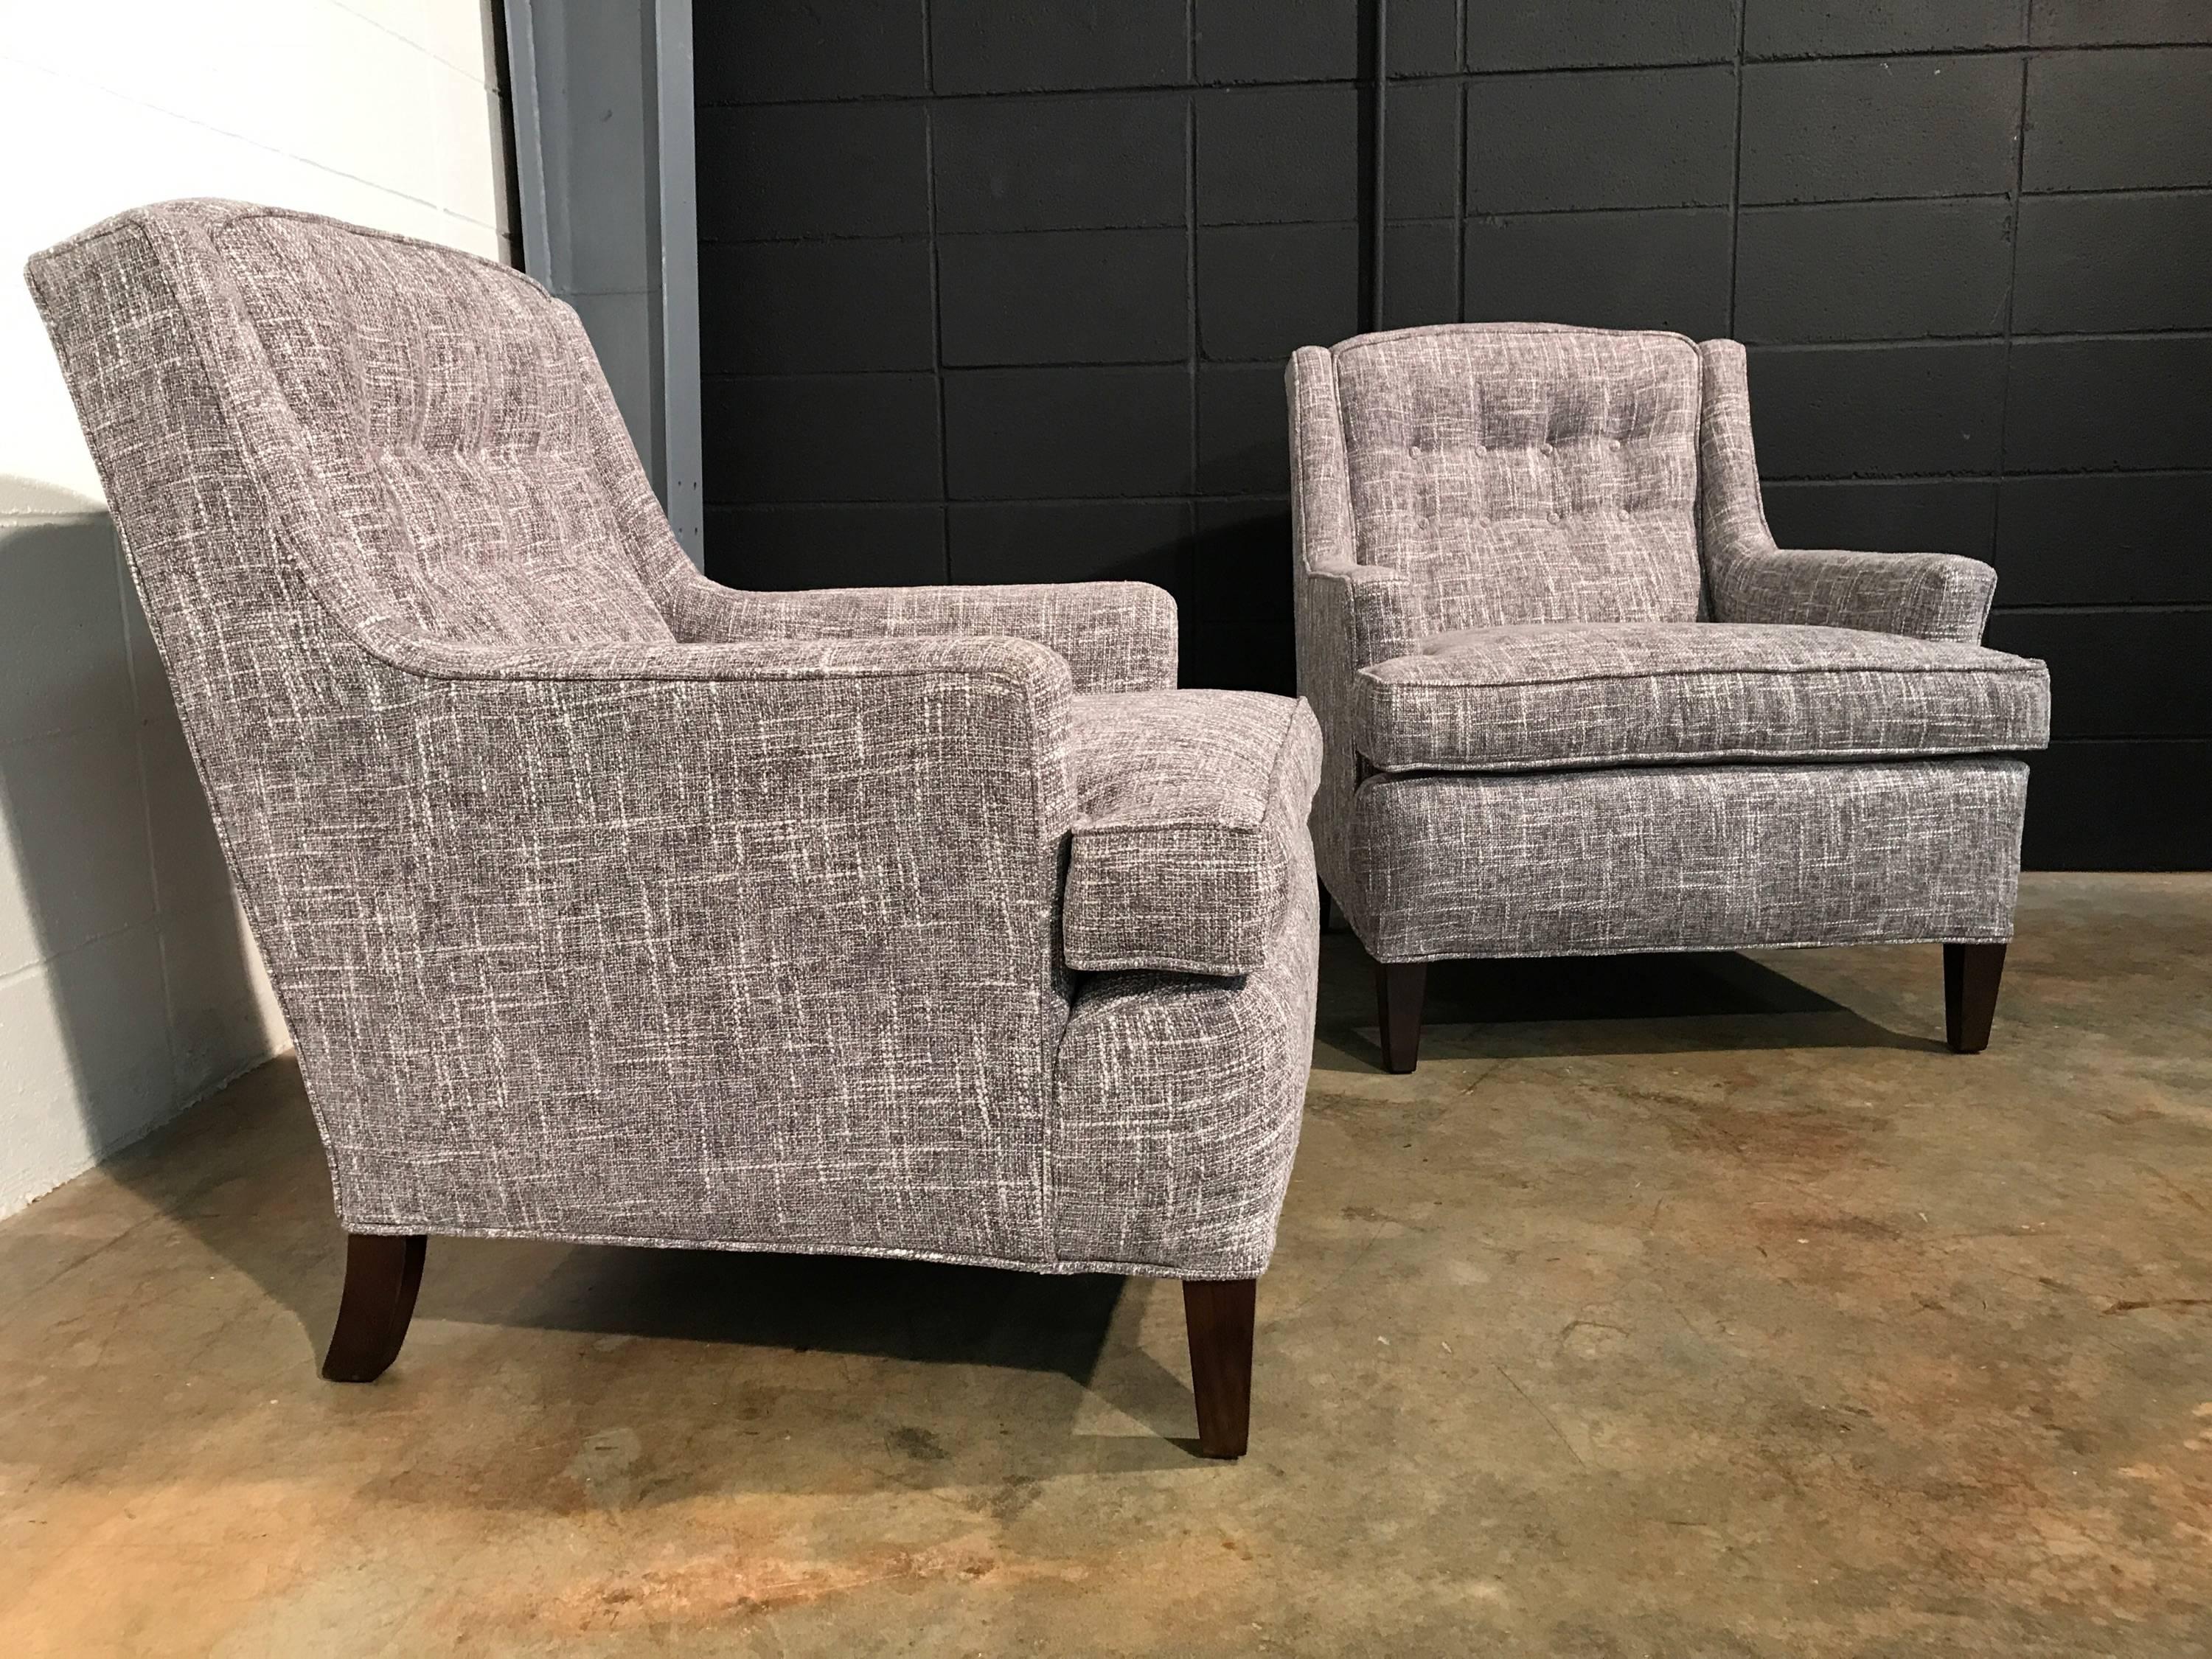 Pair of Restored Mid-Century Modern Lounge Chairs, Gray Upholstery 8